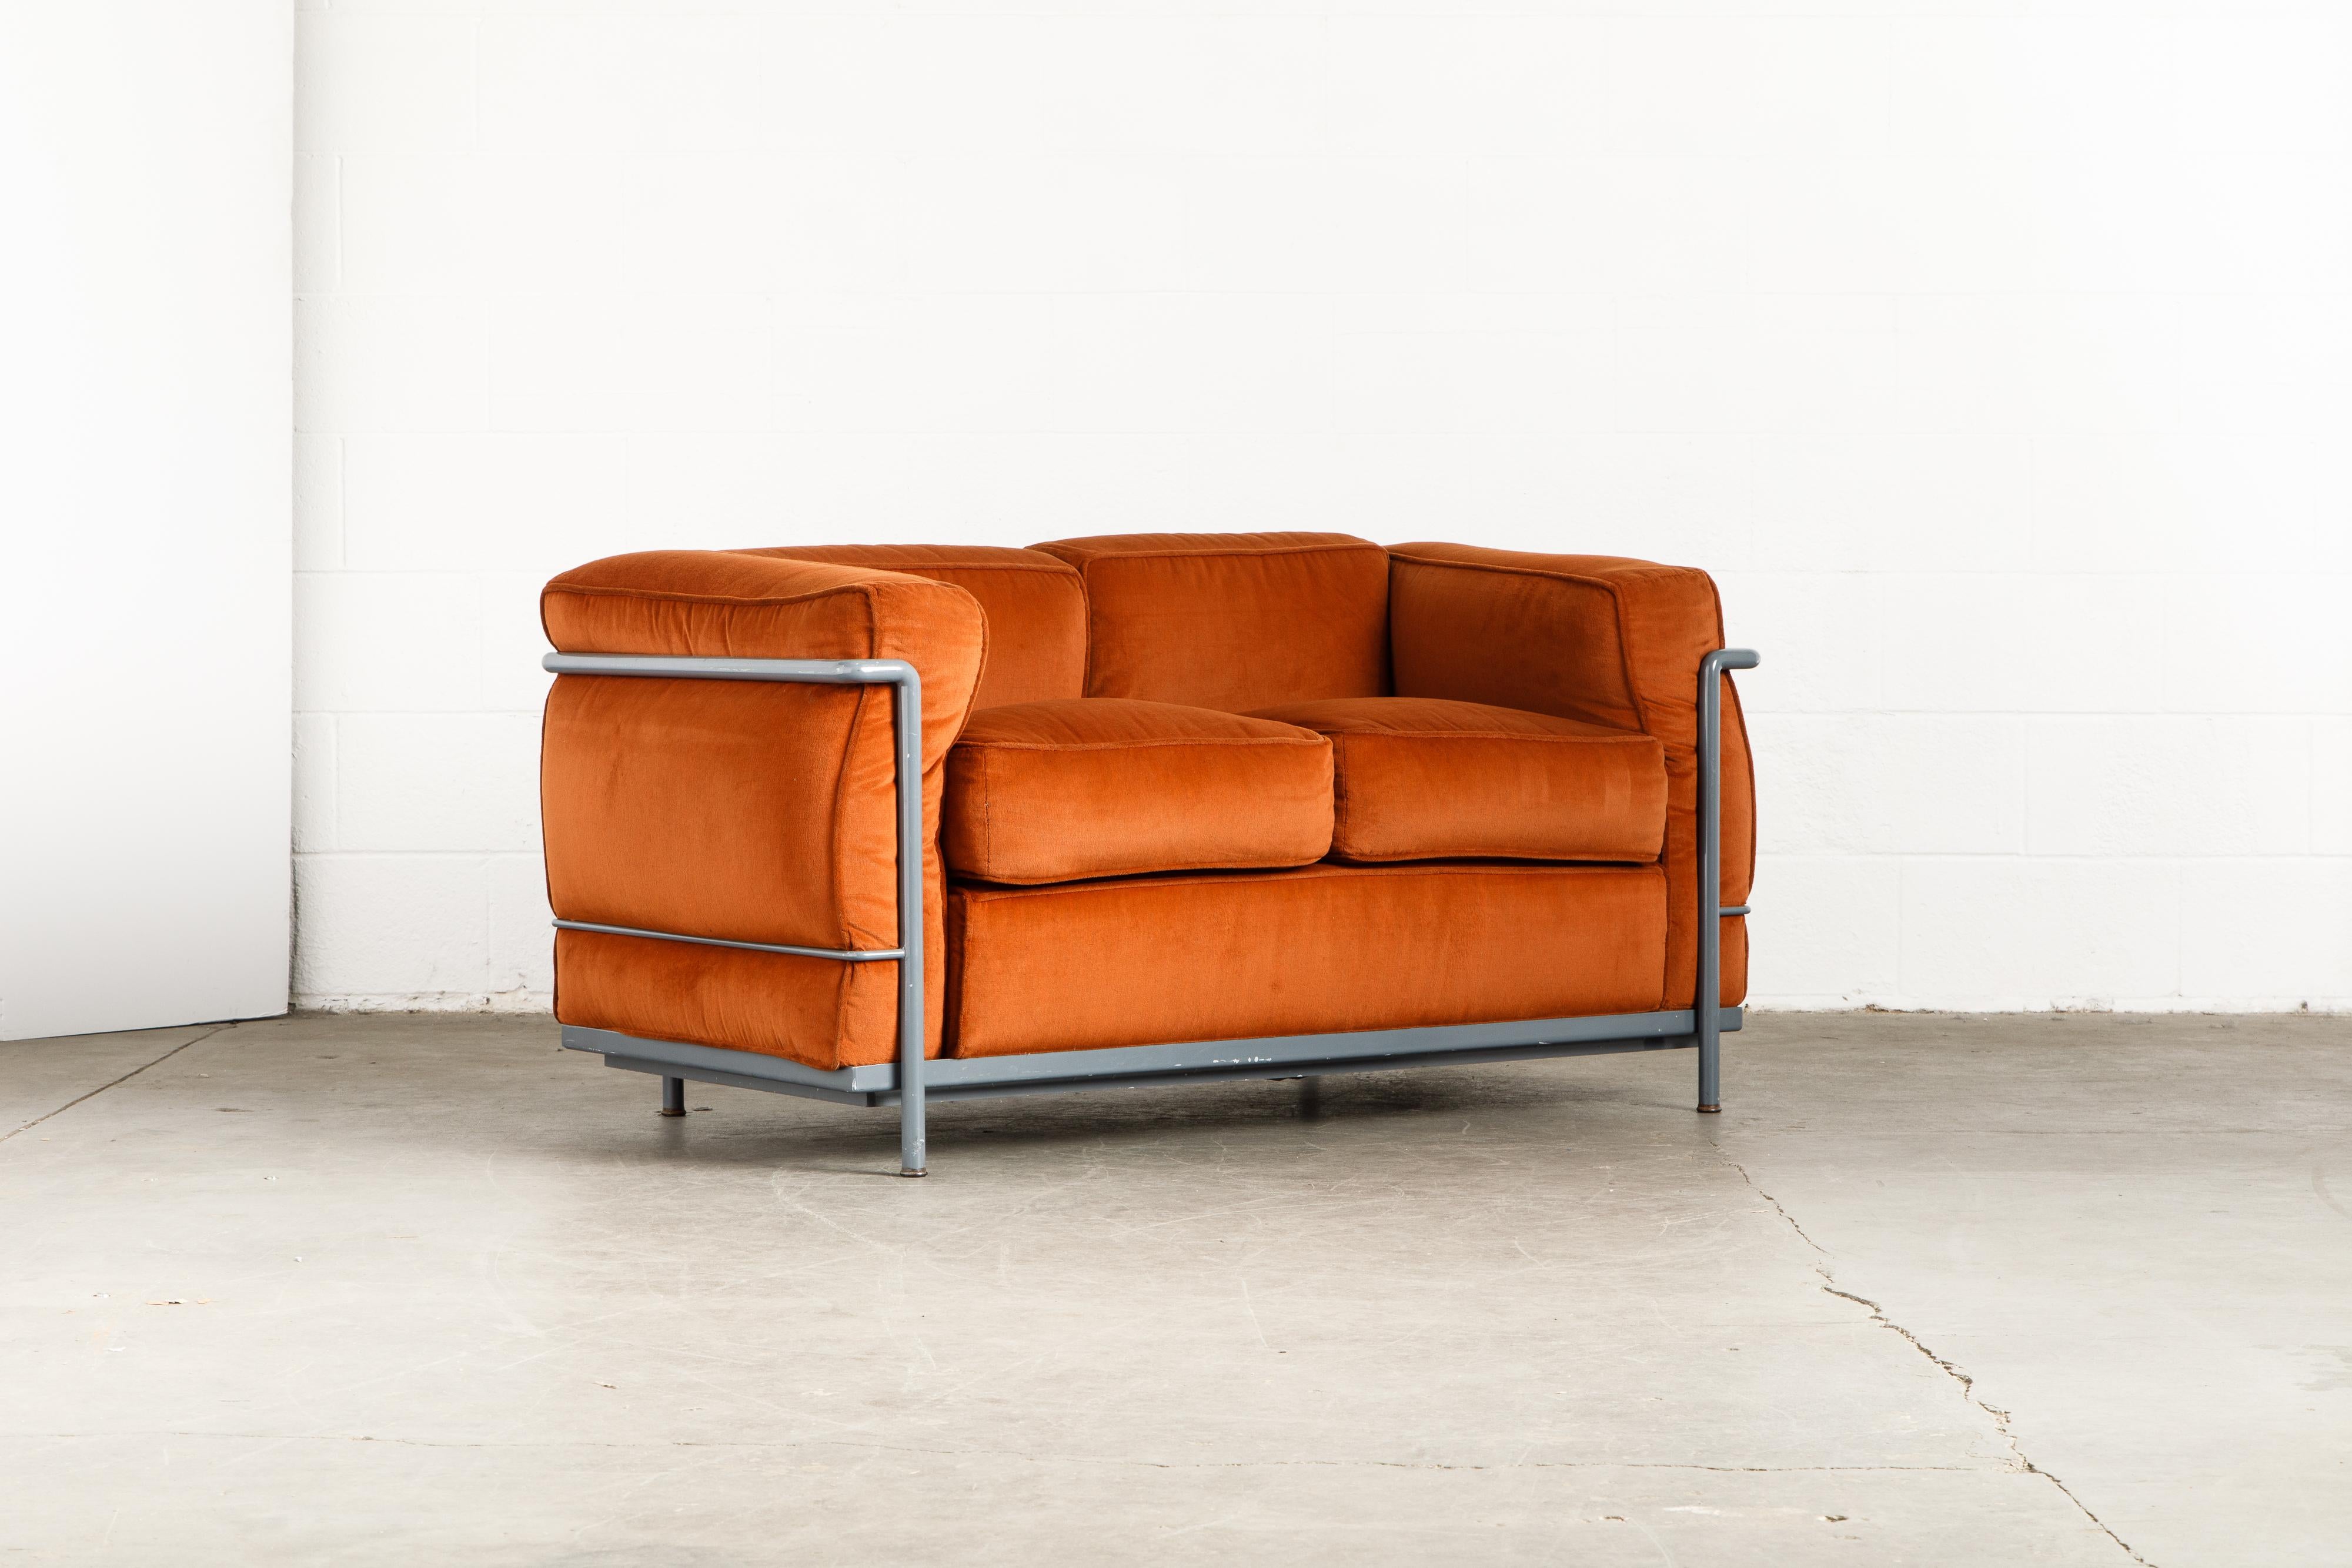 If you want the most comfortable seat to sink your heinie into, this Le Corbusier for Cassina (signed) LC2 loveseat sofa is for you (and of course, your heinie). Comfortable and form fitting, the LC2 - 